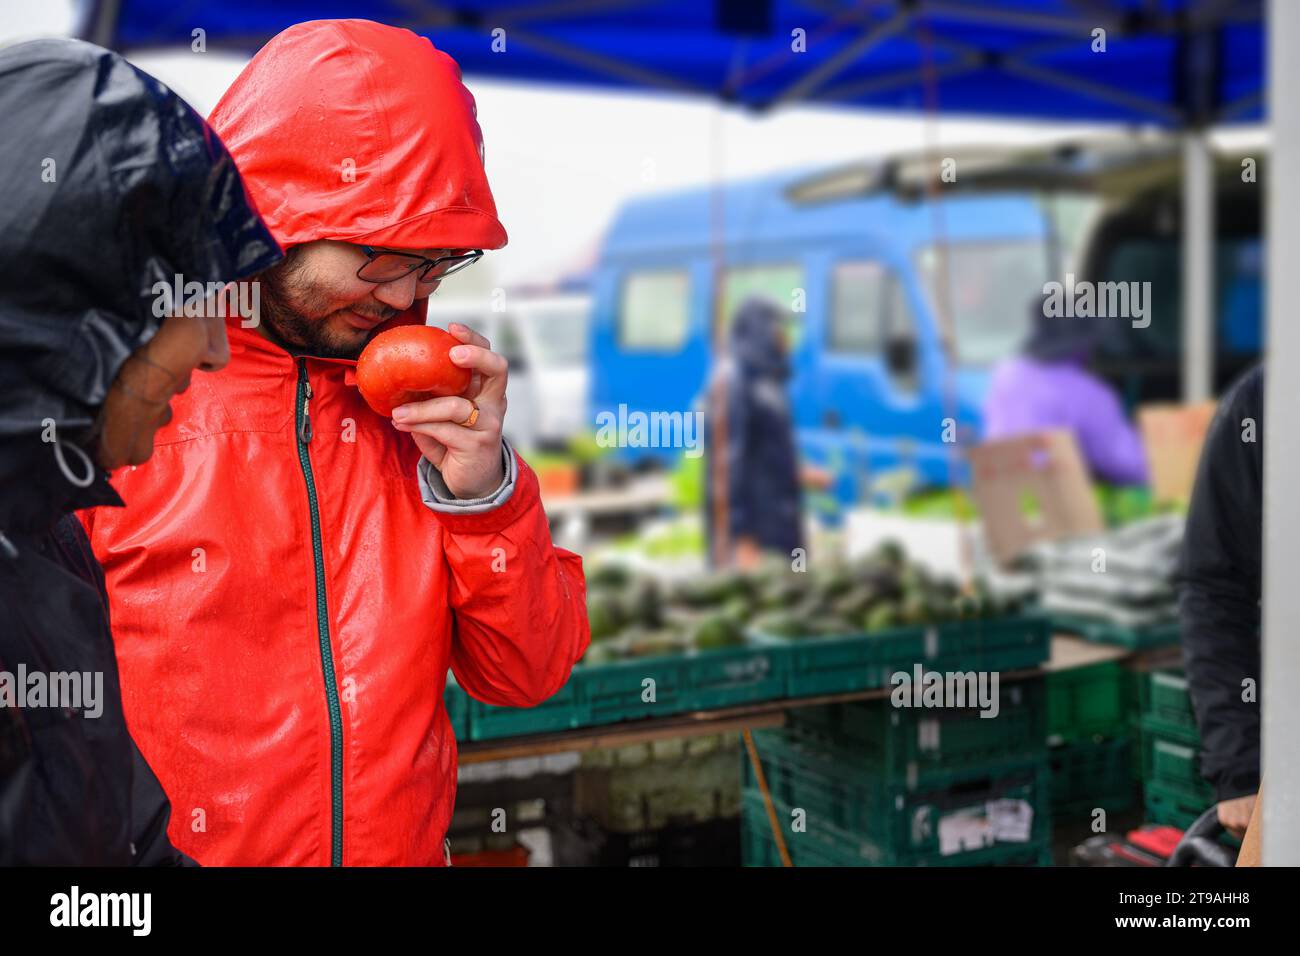 Man holding a ripe tomato and smelling its freshness at a vegetable market. Stock Photo